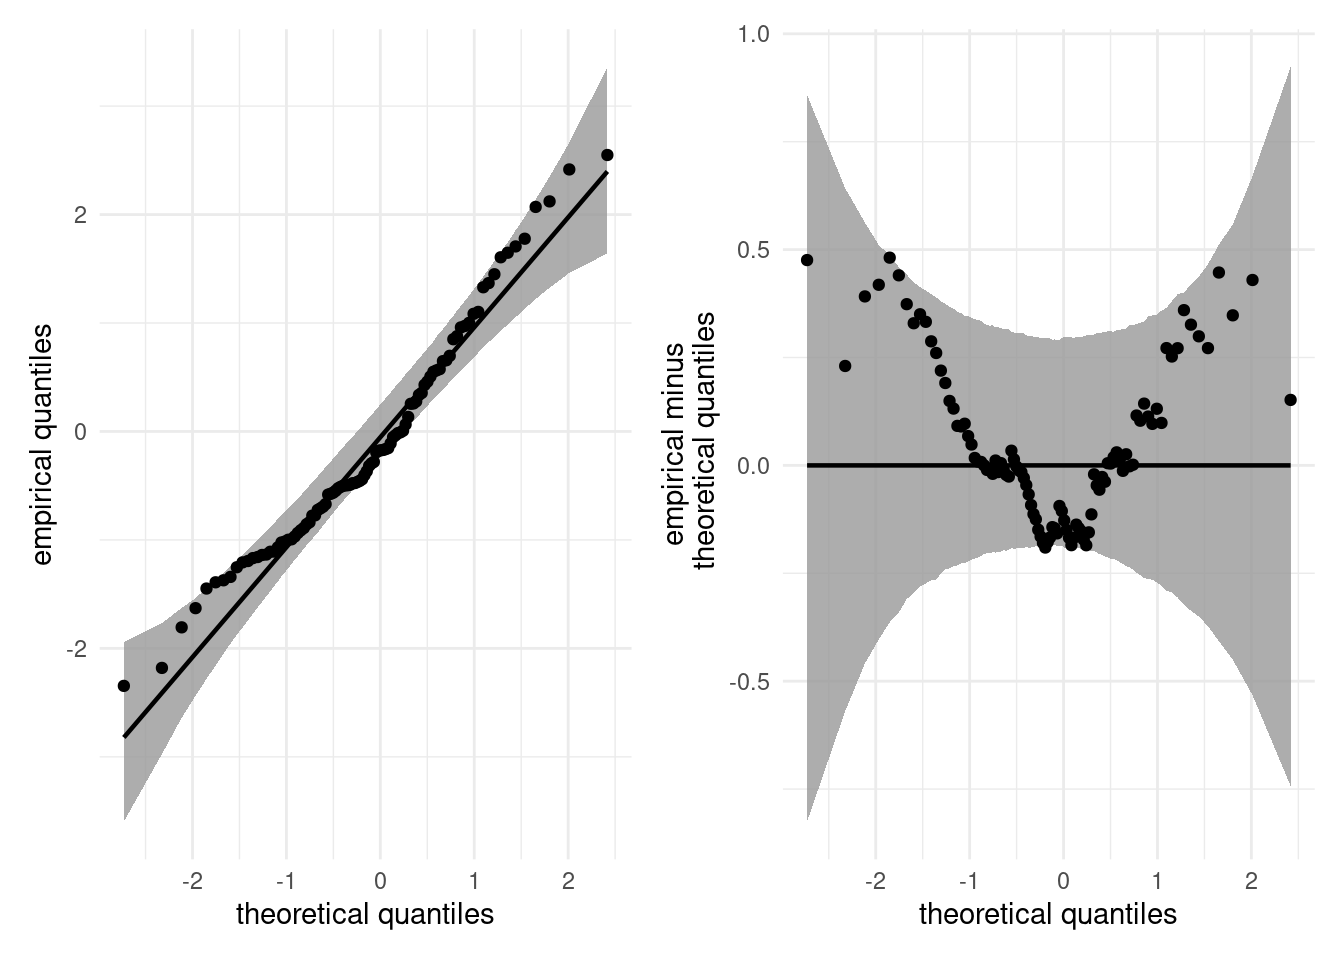 Normal quantile-quantile plot (left) and Tukey's mean different plot (right) for the same data.